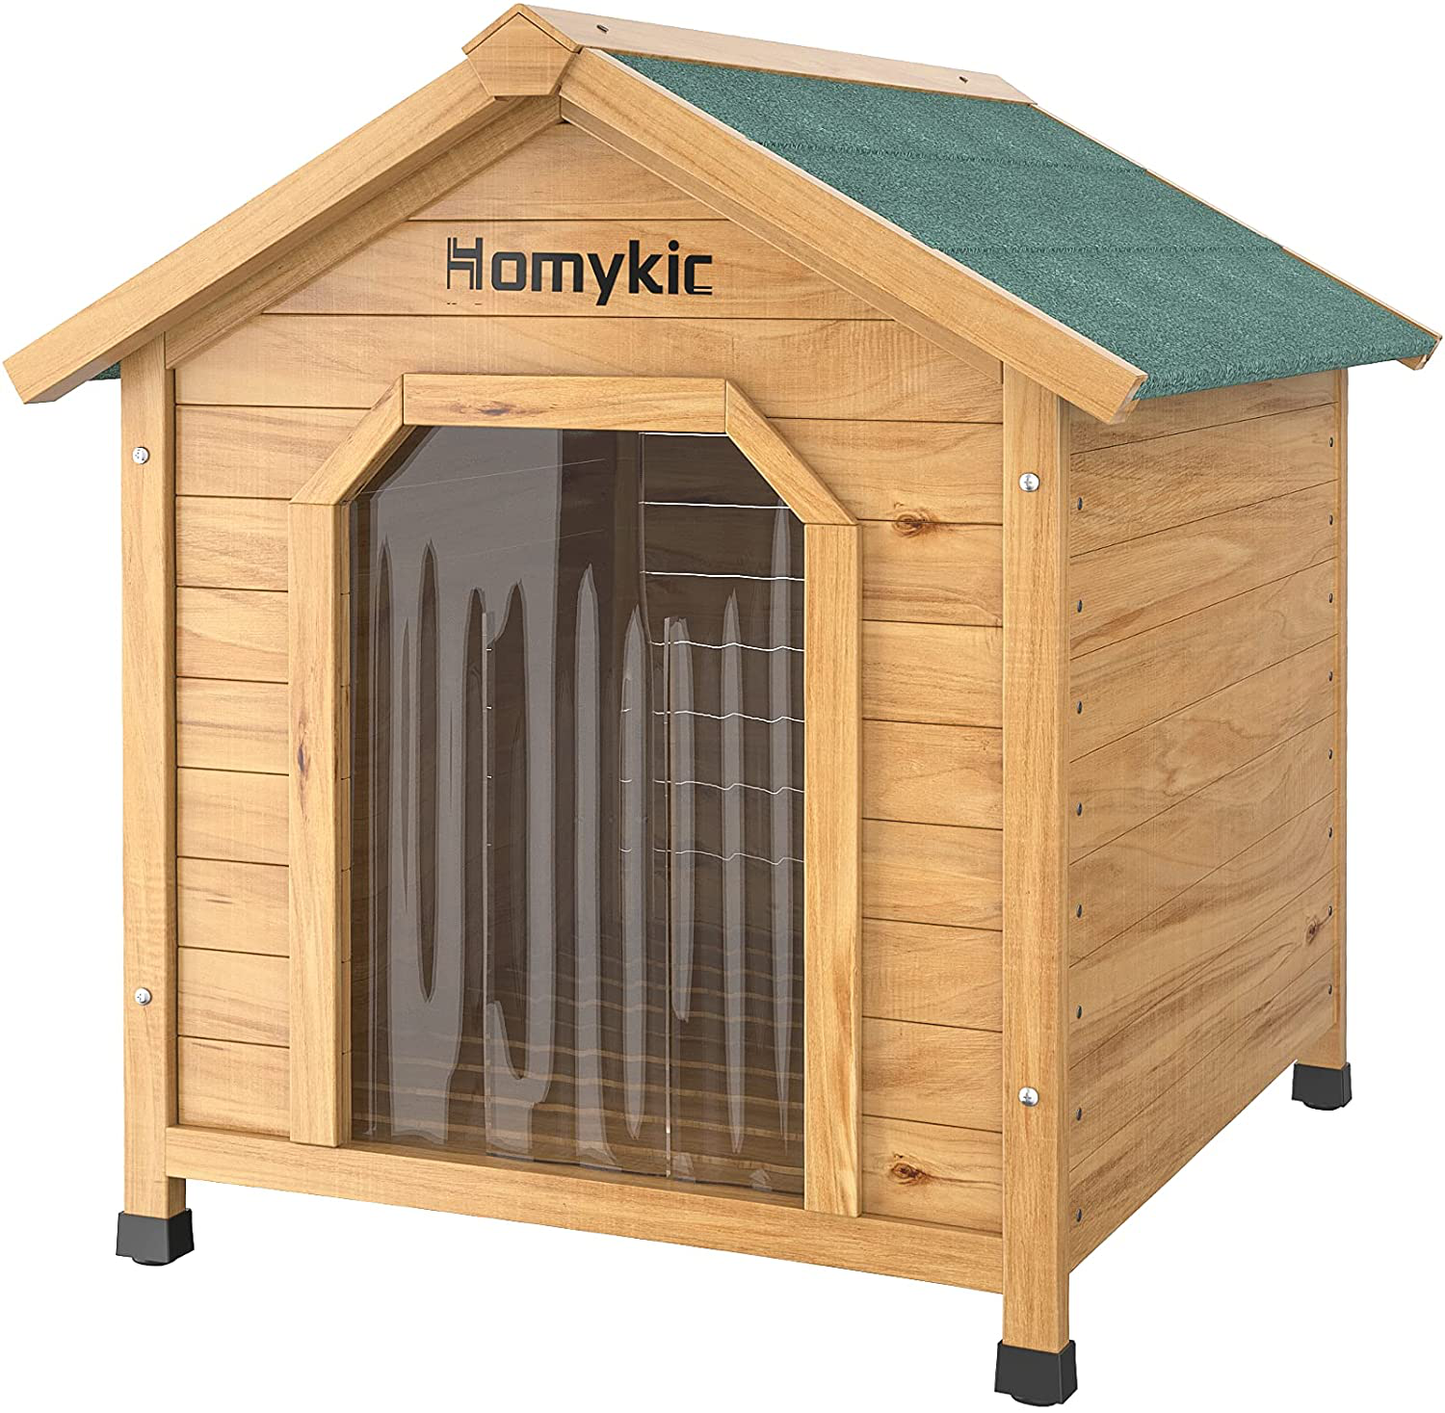 Homykic Dog House Outdoor Wooden, Fir Wood Pet Kennel Doghouse Log Cabin Shelter Weatherproof with Door Flap, Raised Floor, for Cat Rabbit Bunny, 23.6X24.8X29.6 Inch, Small